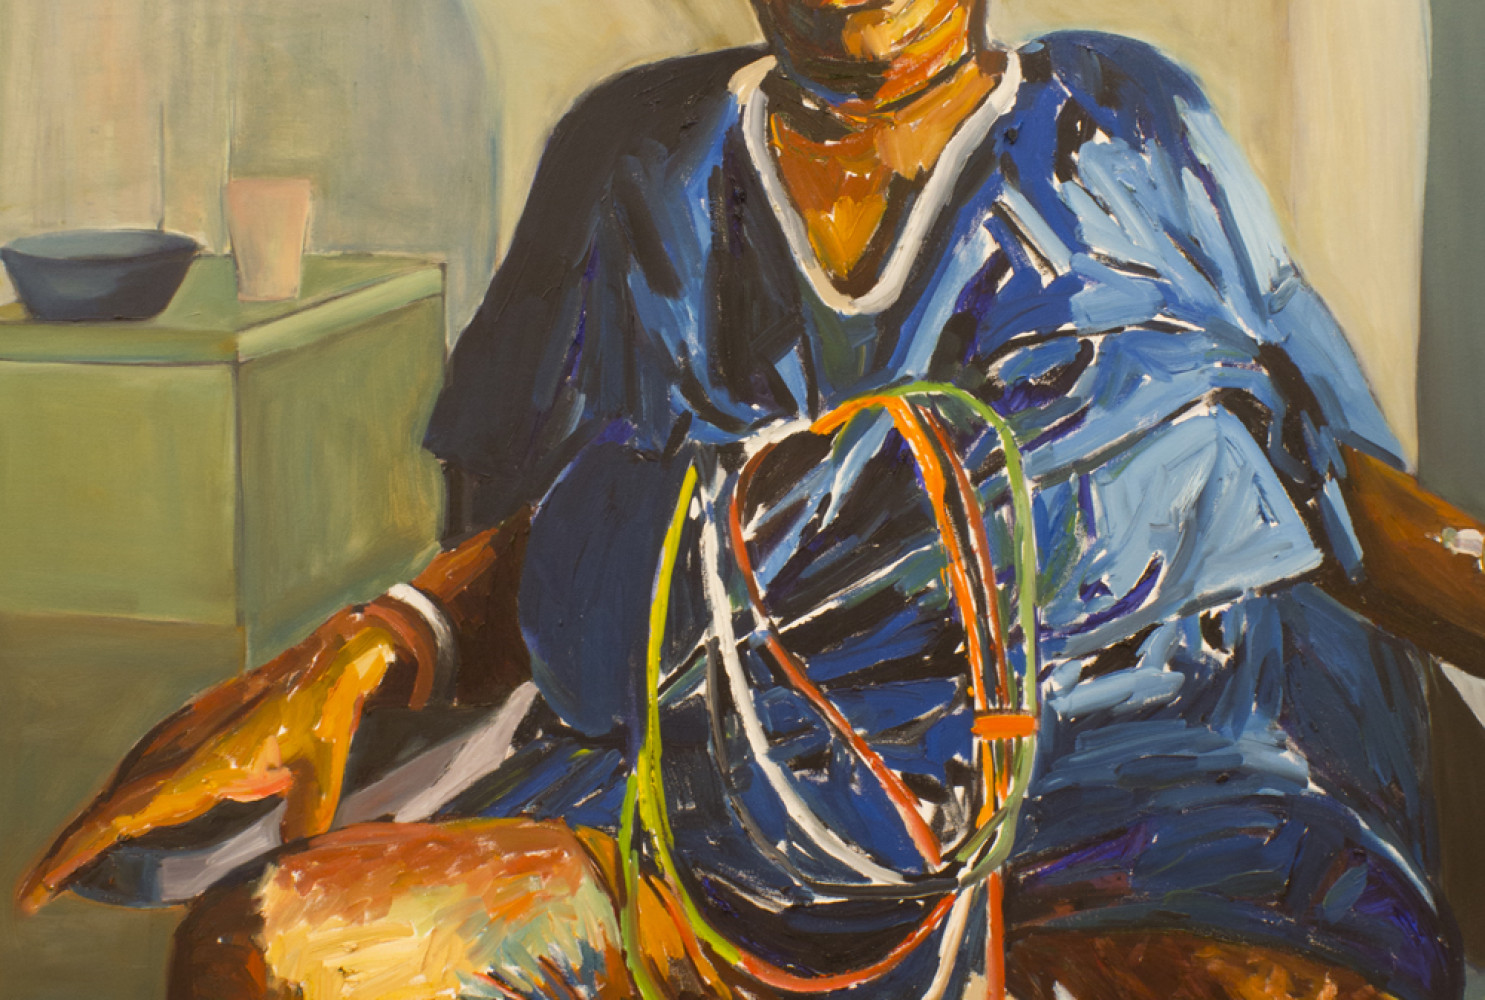 Double Amputee, 2013,by Beverly McIver (American, b. 1962). Oil on canvas, 48 x 36 inches.Courtesy of the artist.
